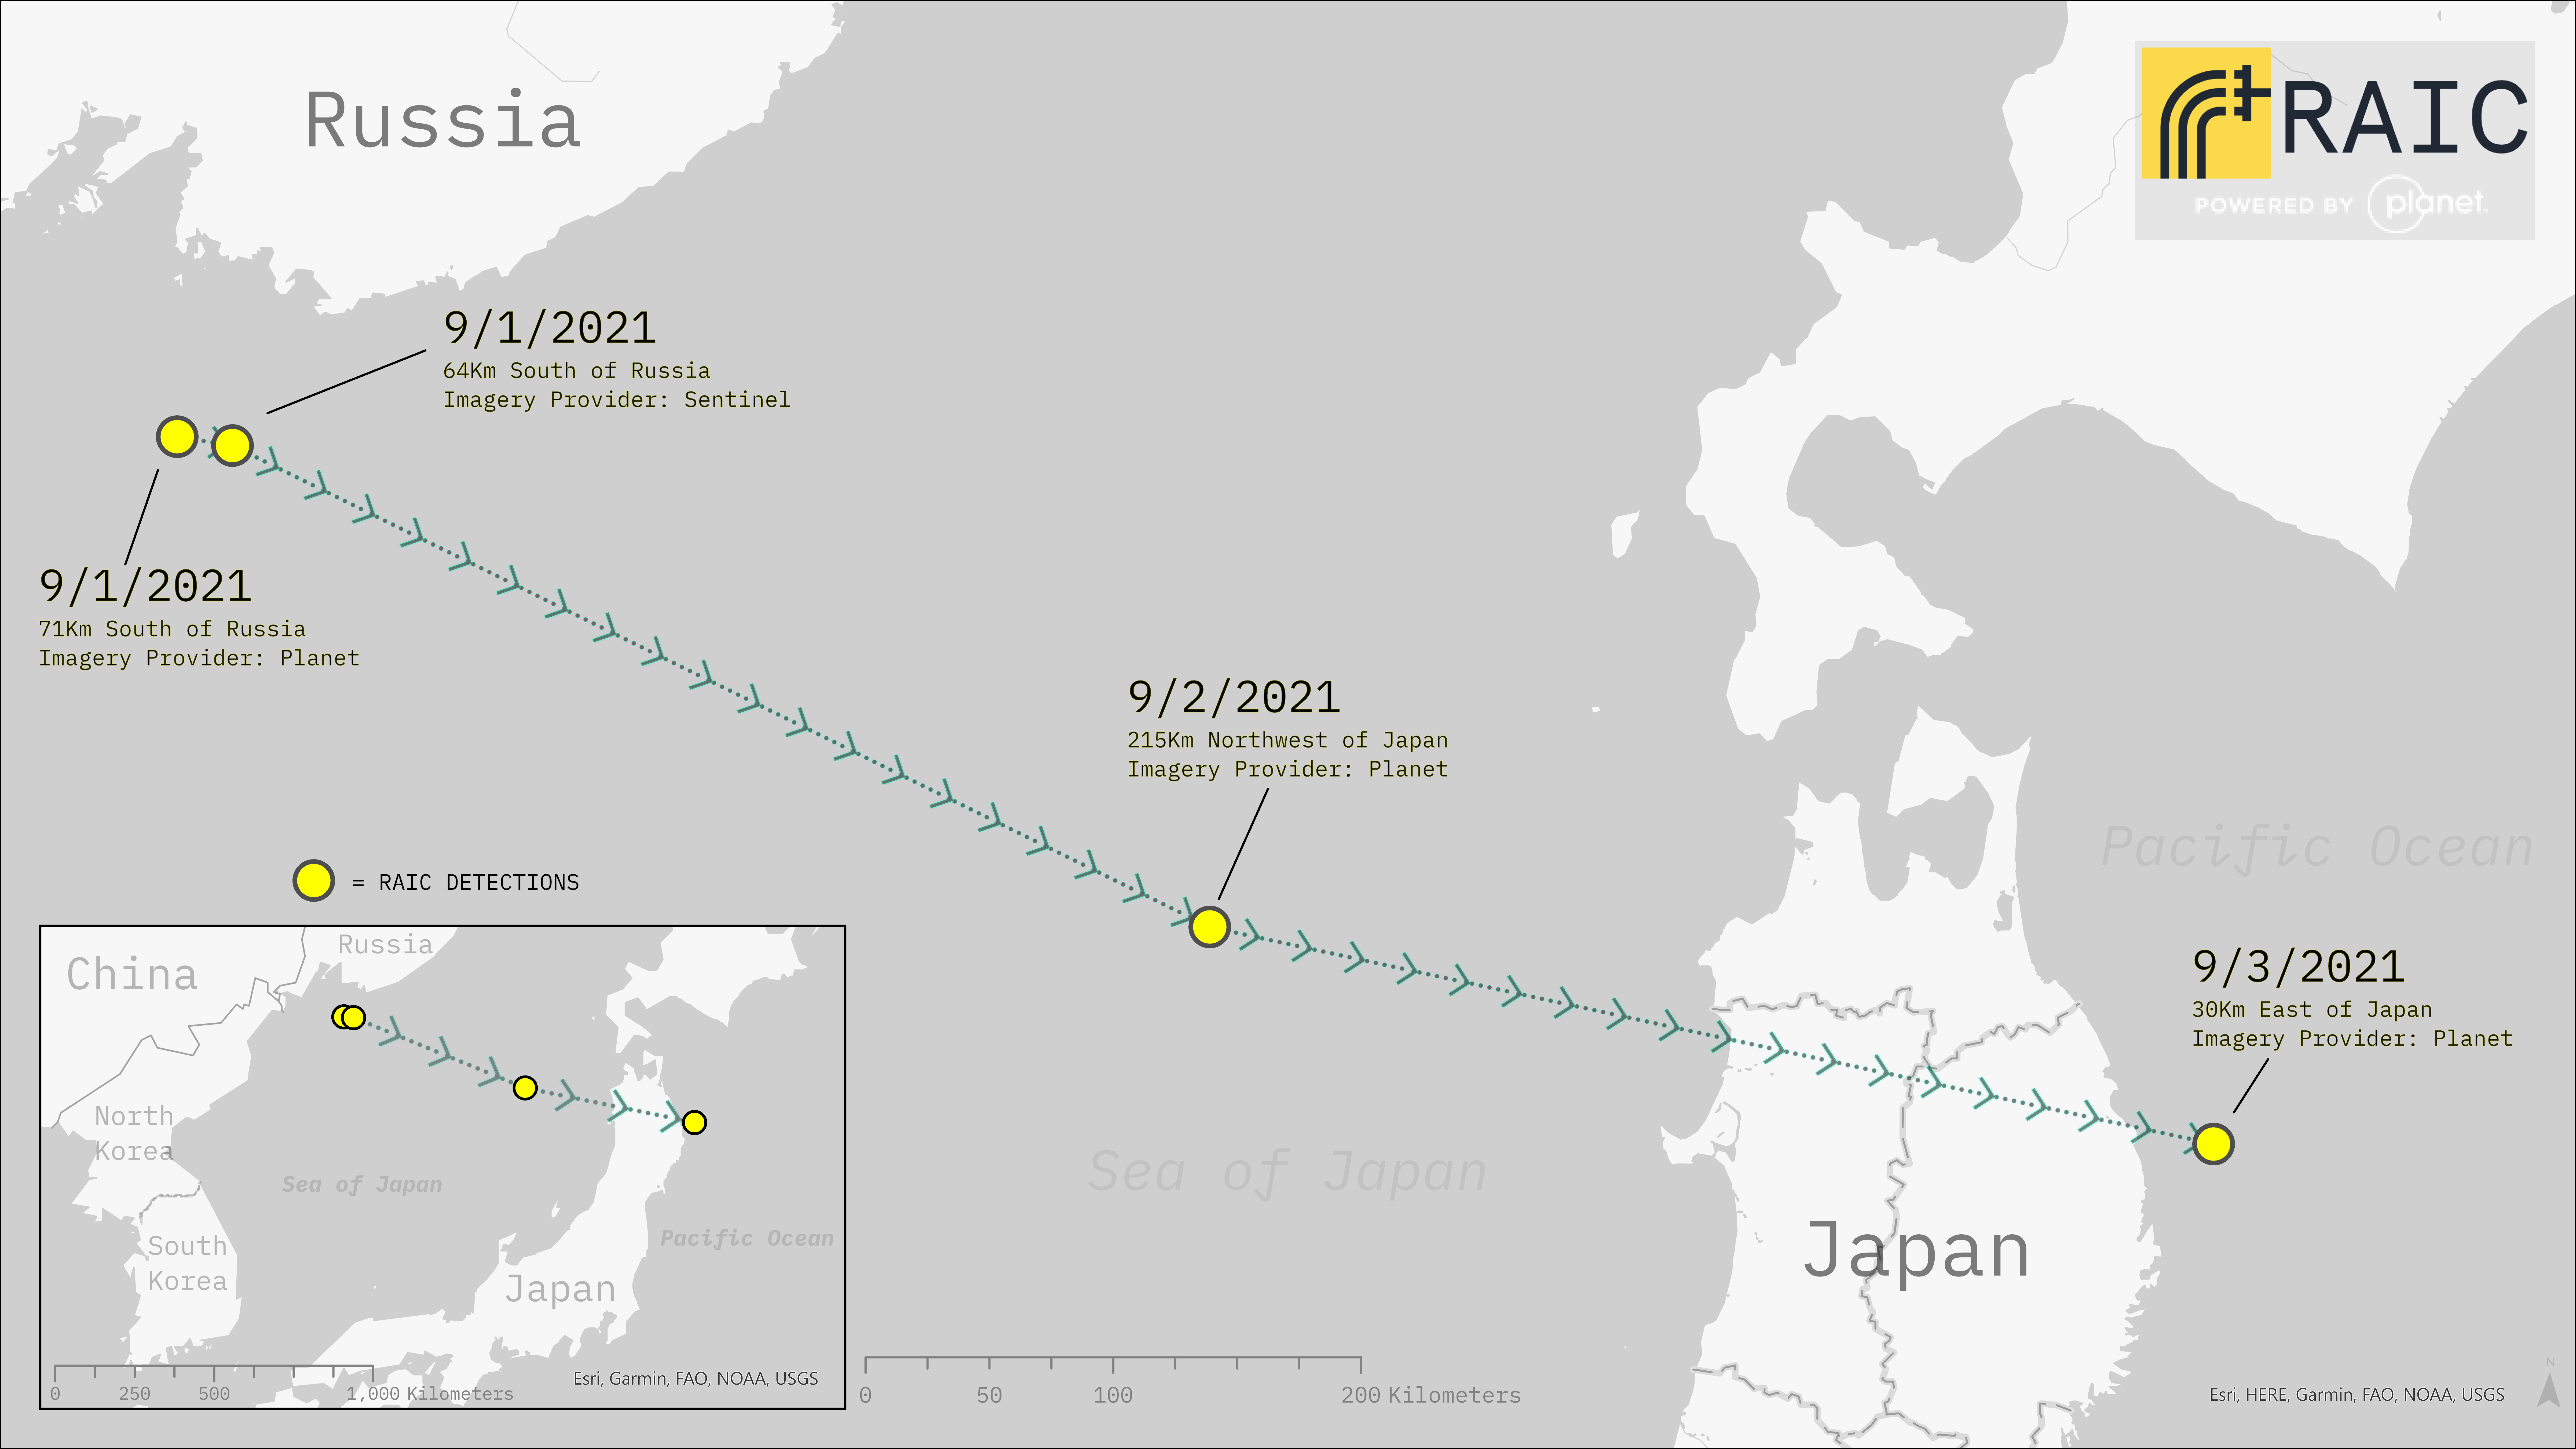 Map showing balloon sightings from 9/1 to 9/3 over the Sea of Japan